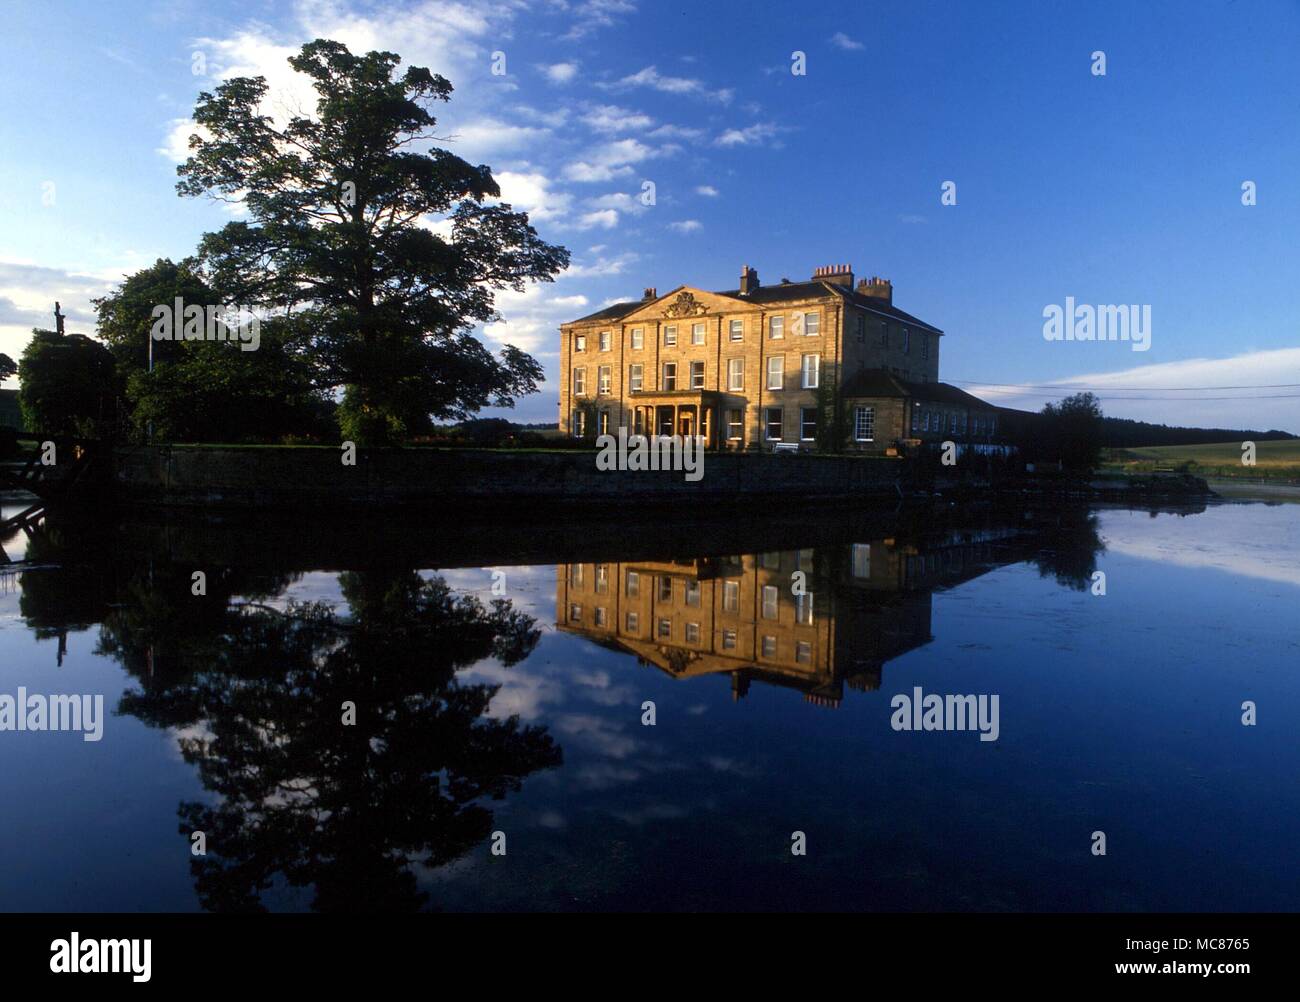 STRANGE Places Walton Hall, the former mansion of the eccentric, Charles Waterton, who moved to the moated hall near Wakefield in the 1820s. the main body of his eccentric collection is now in Wakefield City museum Stock Photo